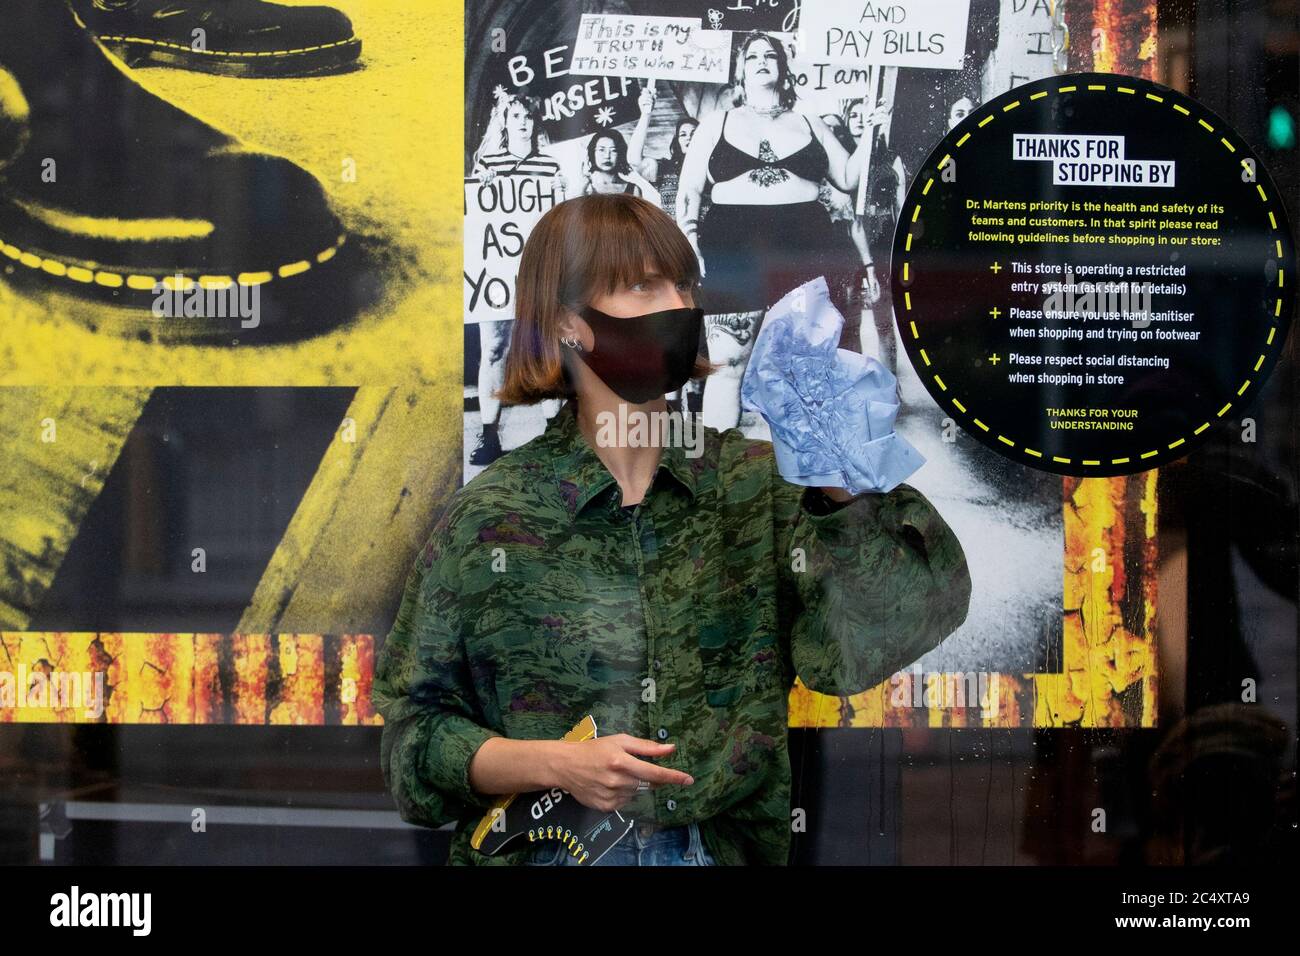 A member of staff at the Dr Martens shop in Edinburgh's Princes Street  makes preparations as non-essential stores across the country reopen today  as part of Scotland's phased plan to ease out